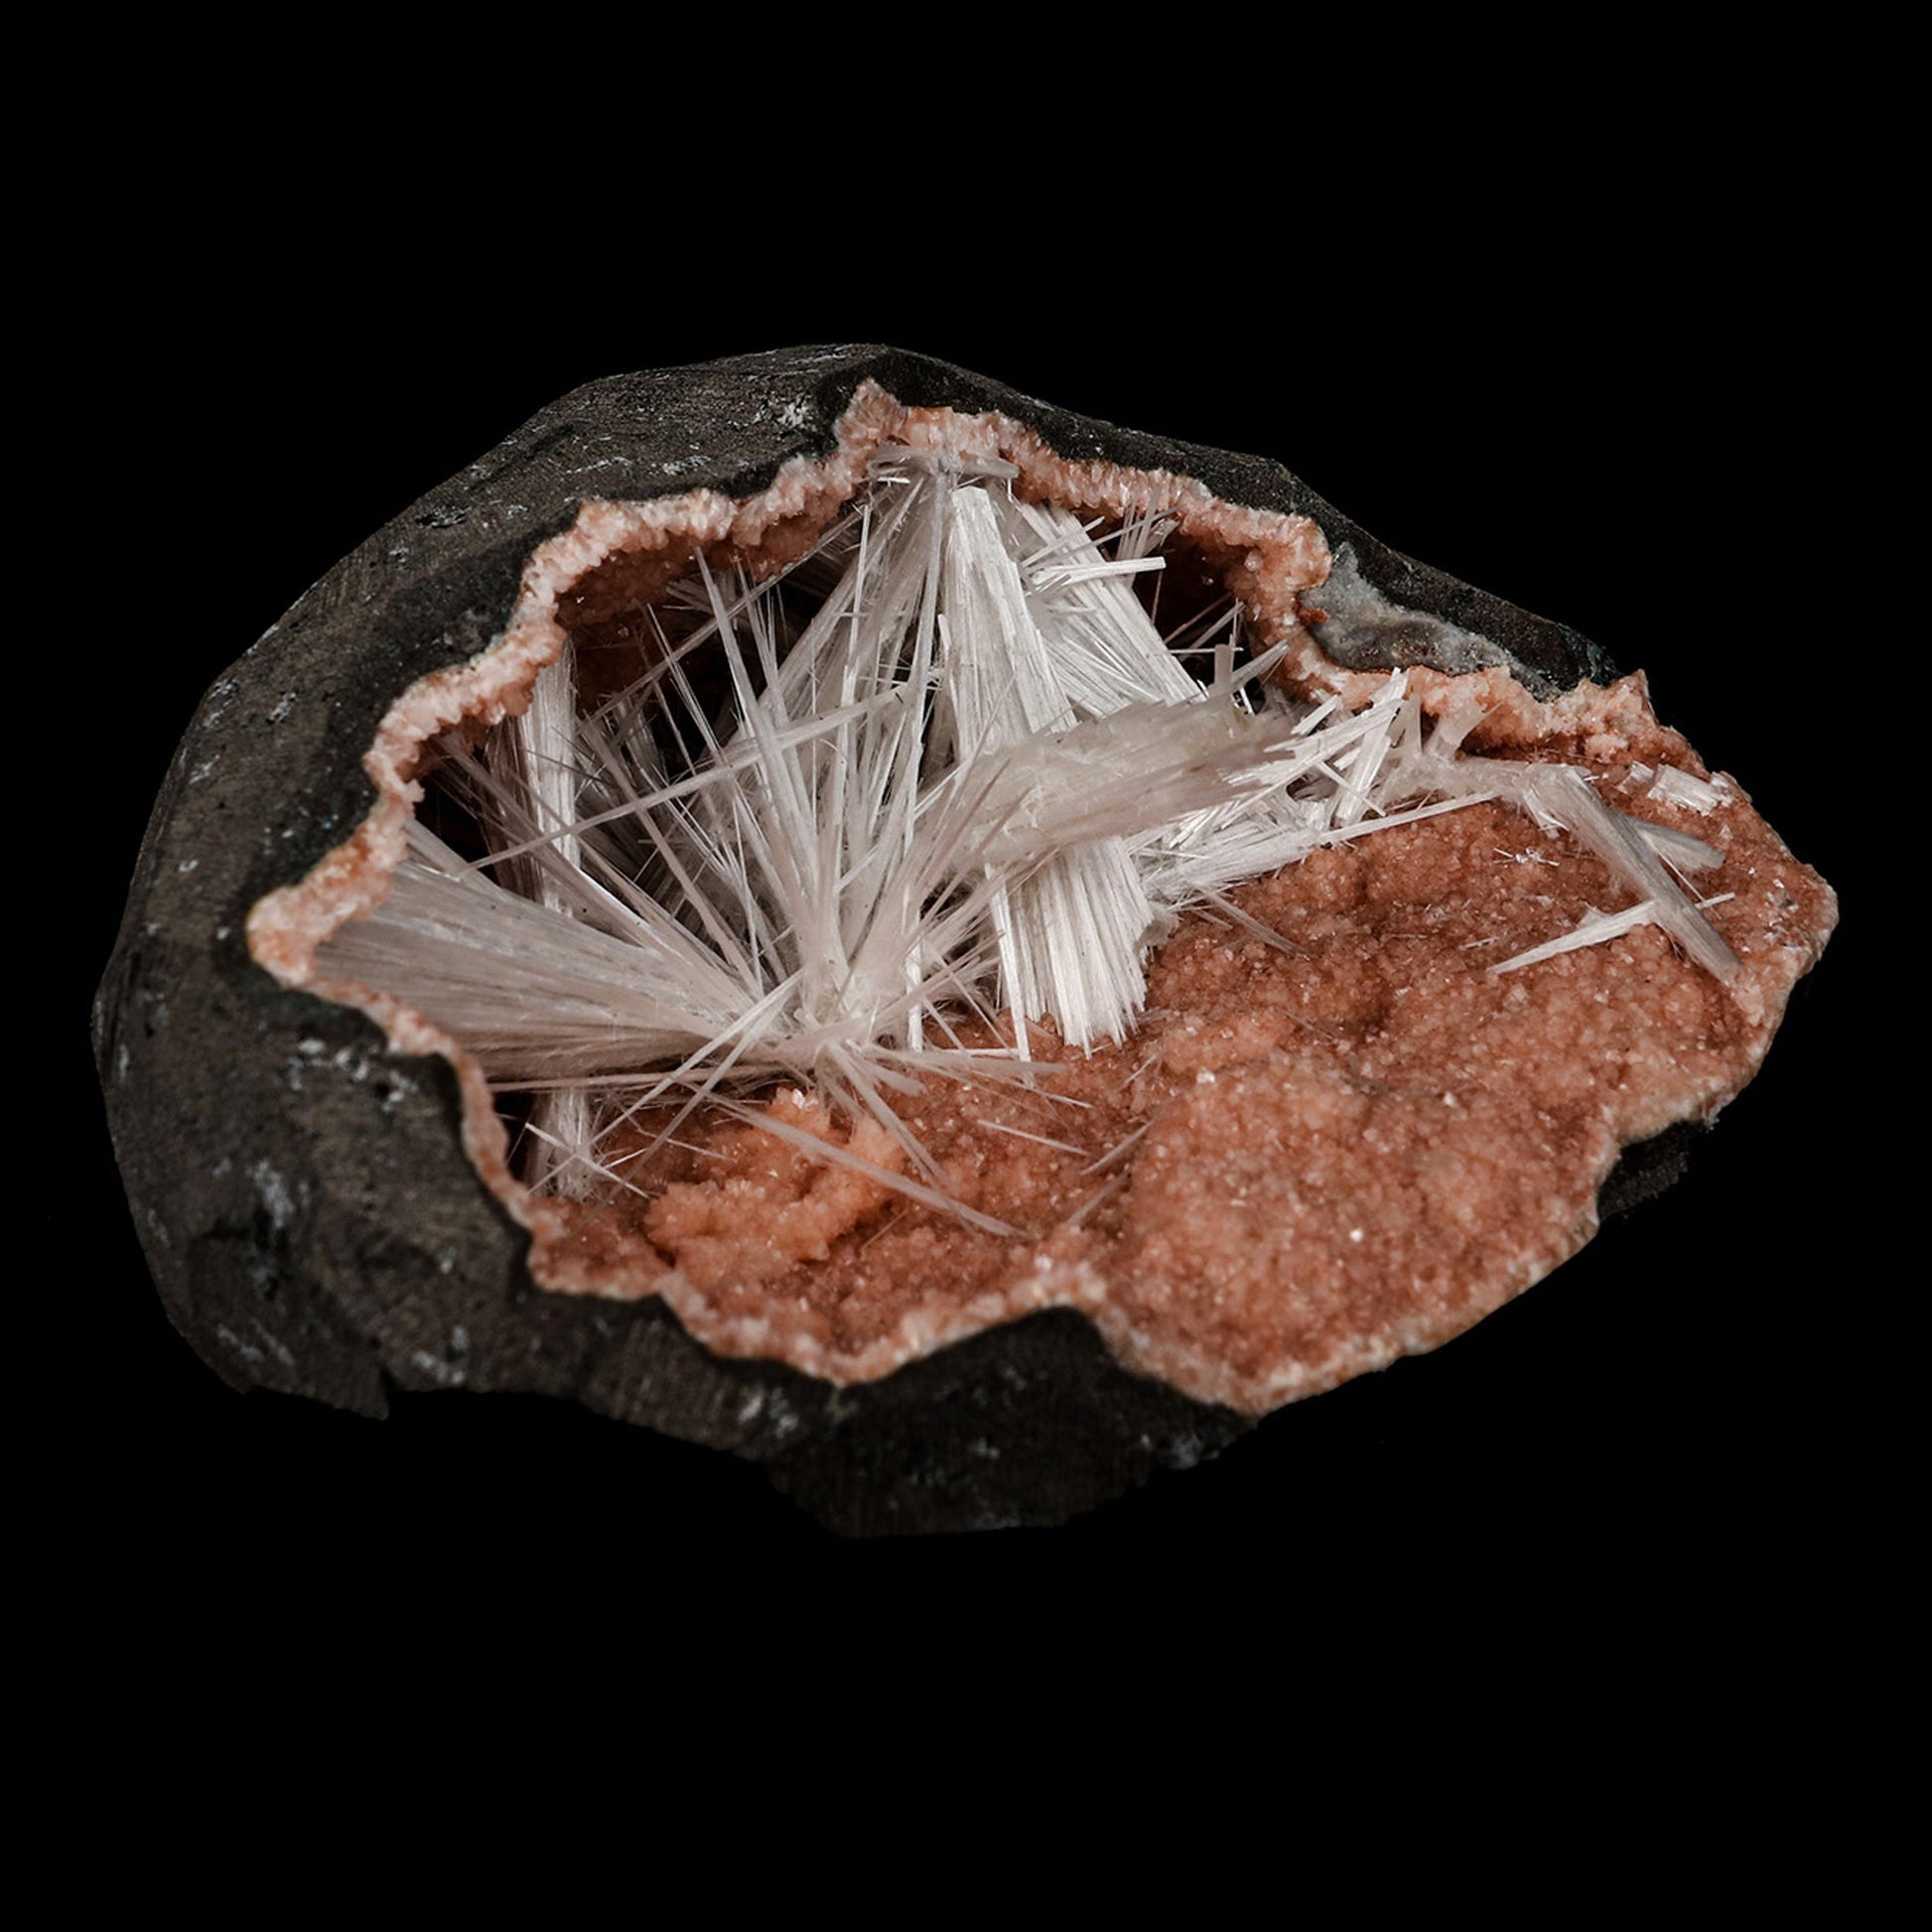 Scolecite Sprays Inside Heulandite Geode Natural Mineral Specimen # B…  https://www.superbminerals.us/products/scolecite-sprays-inside-heulandite-geode-natural-mineral-specimen-b-5269  Features: Scolecite crystals cover a reddish heulandite matrix in a geode. An unwanted piece of rock is removed by sawing. Primary Mineral(s): Scolecite Secondary Mineral(s): HeulanditeMatrix: N/A 4 Inch x 3.5 InchWeight : 343 GmsLocality: Aurangabad, Maharashtra, India Year of Discovery: 2021